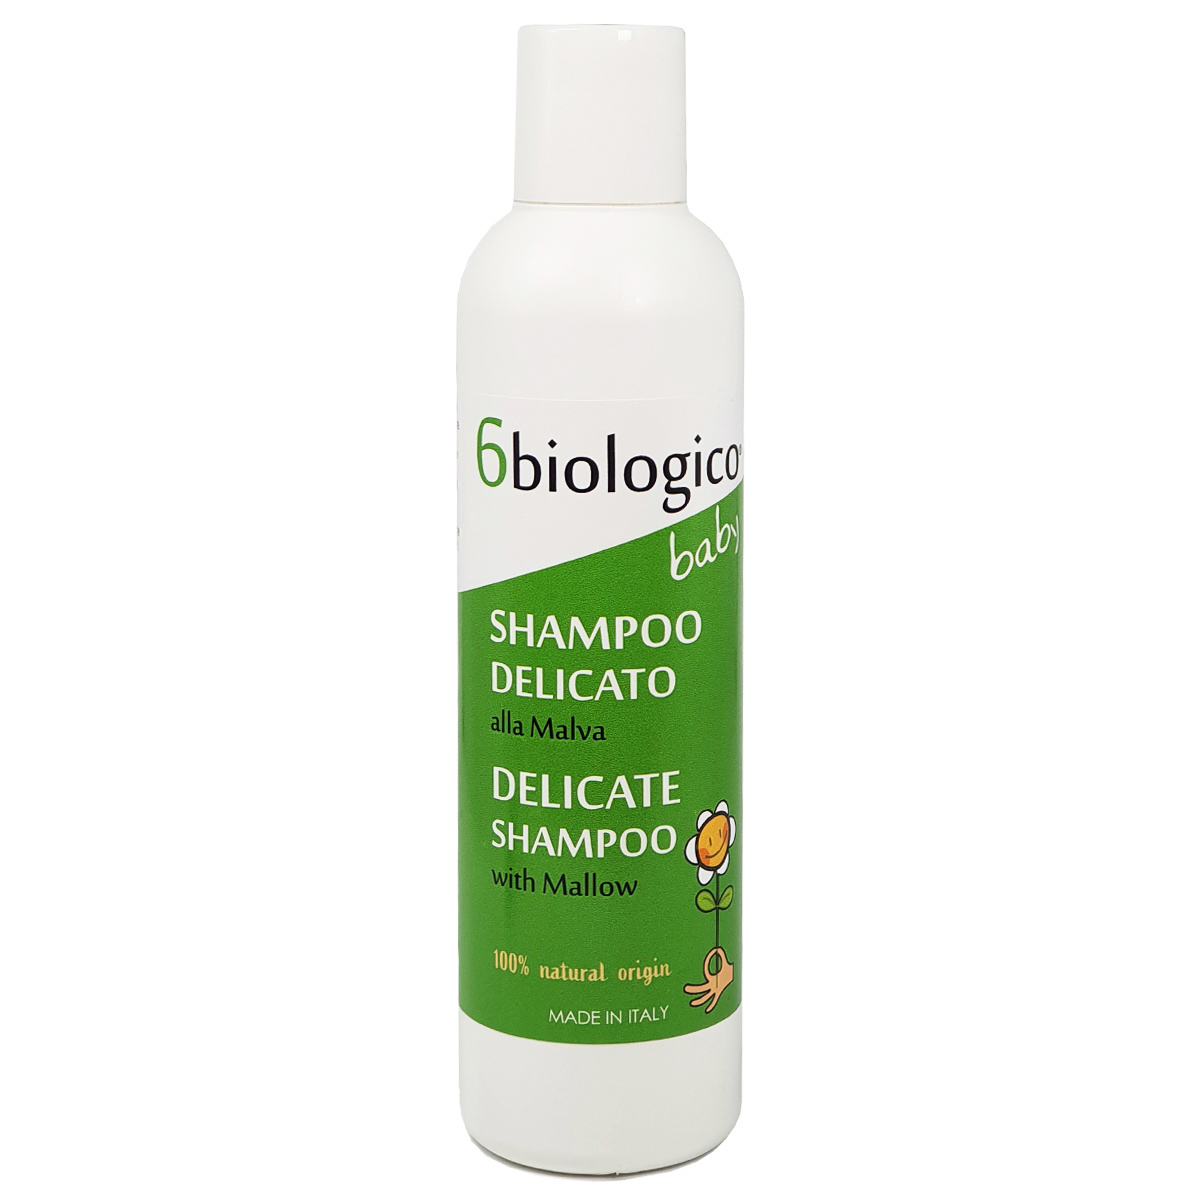 DELICATE SHAMPOO with Mallow